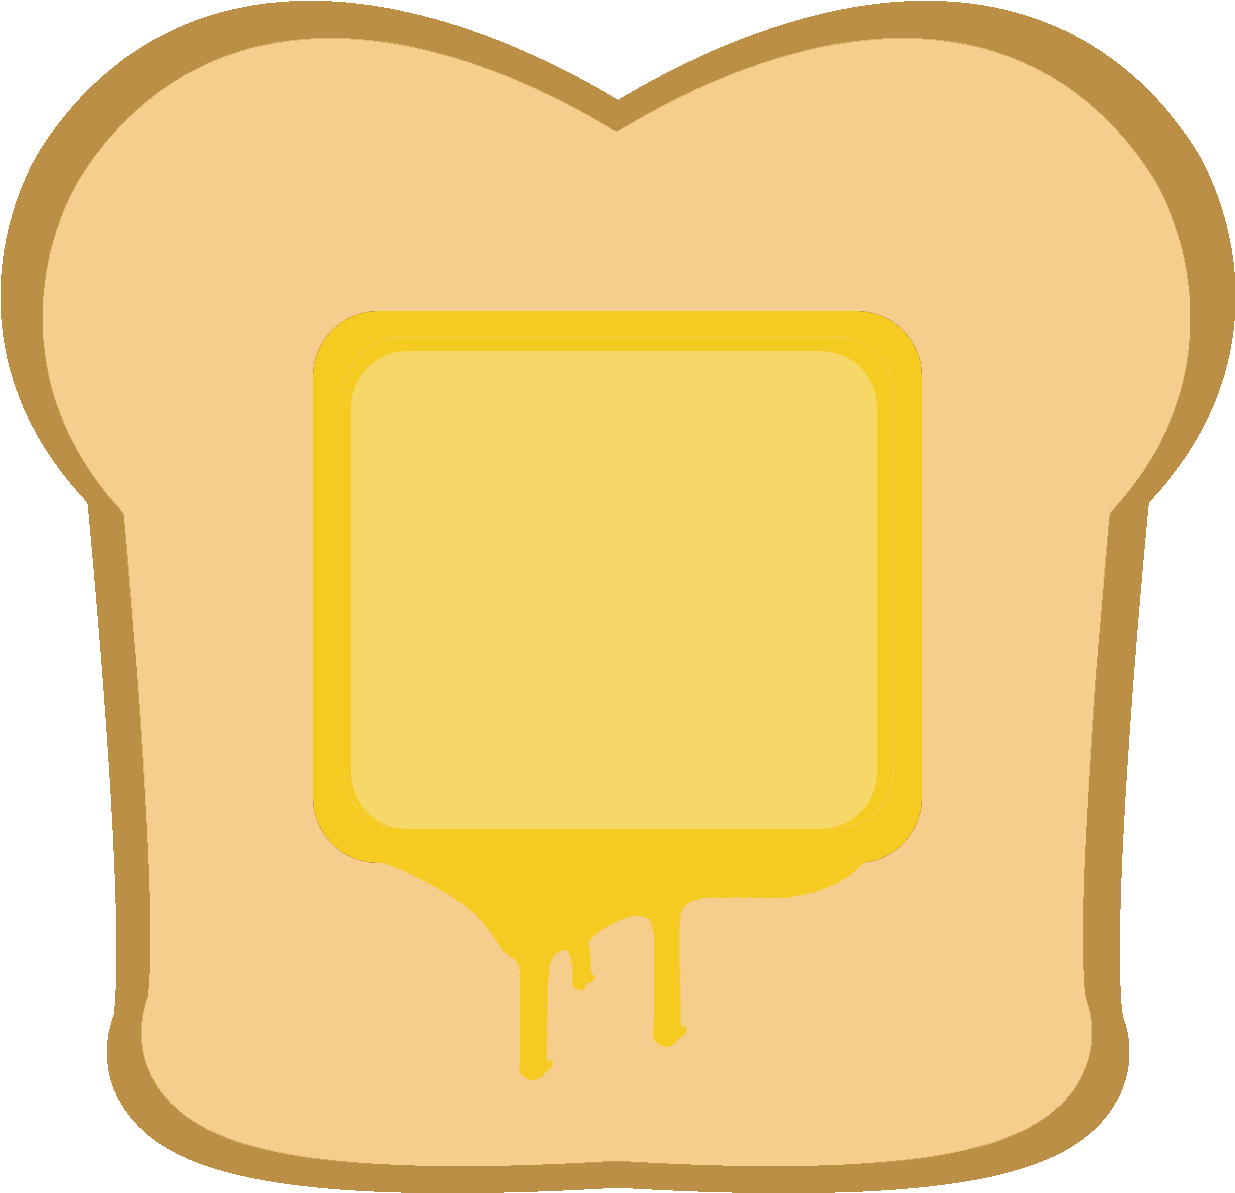 A Piece Of Bread With A Square In The Middle